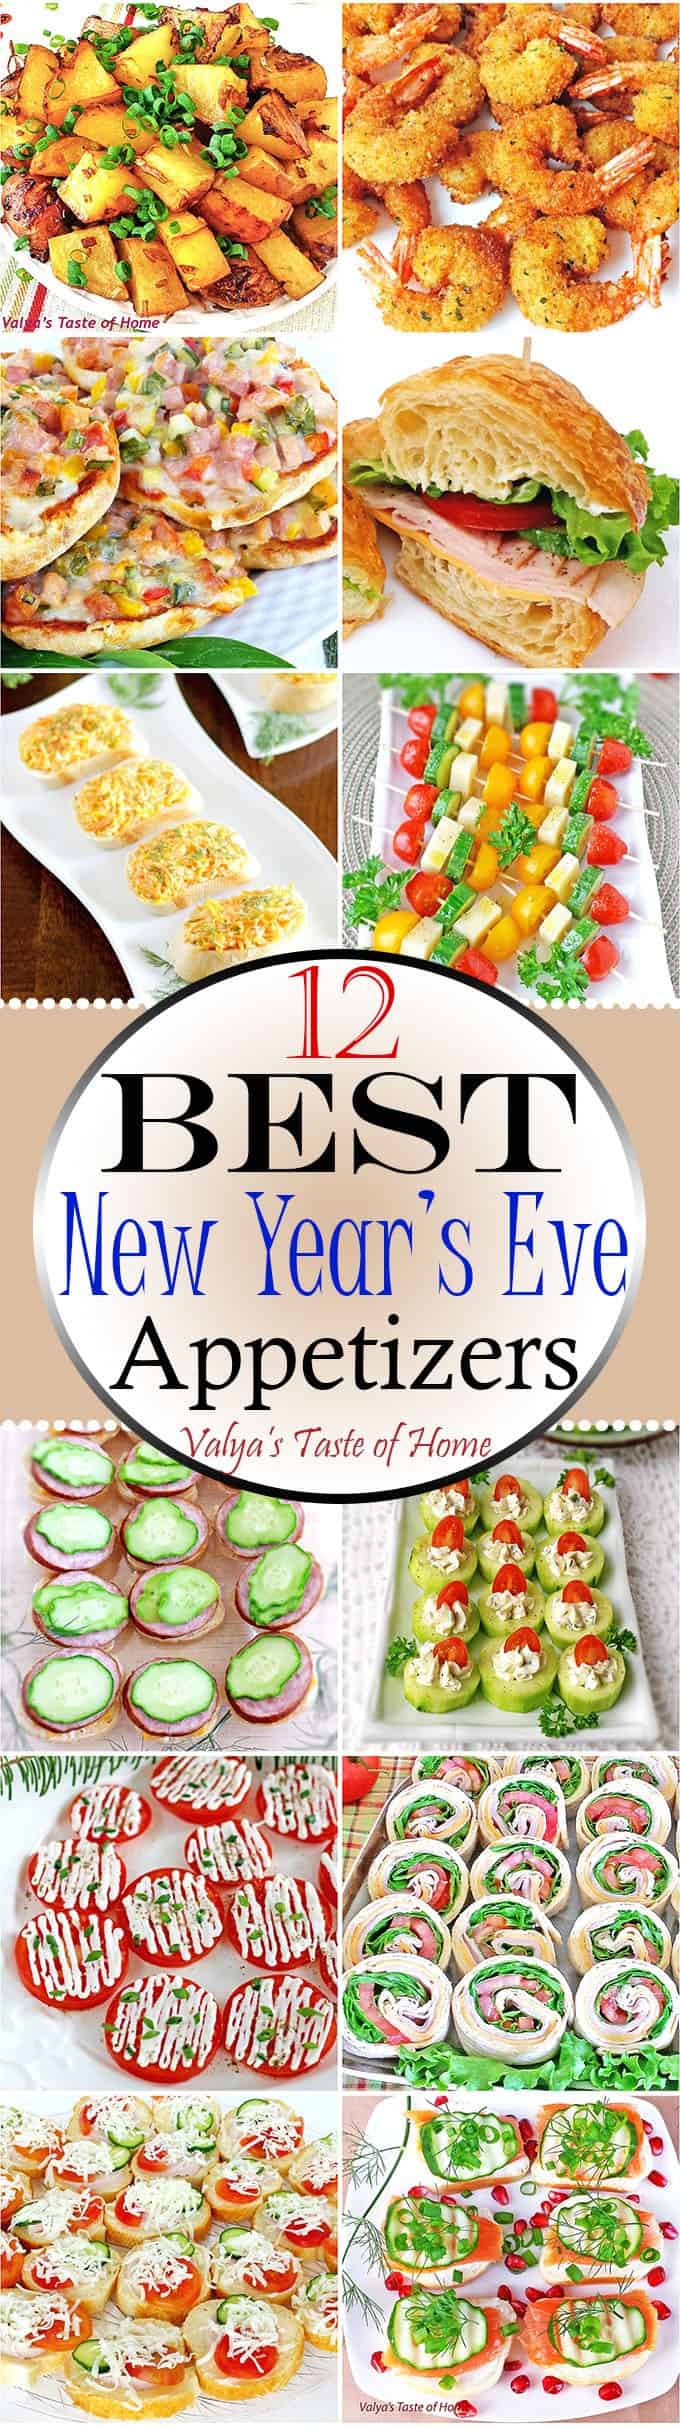 12 Best New Year's Eve Appetizers